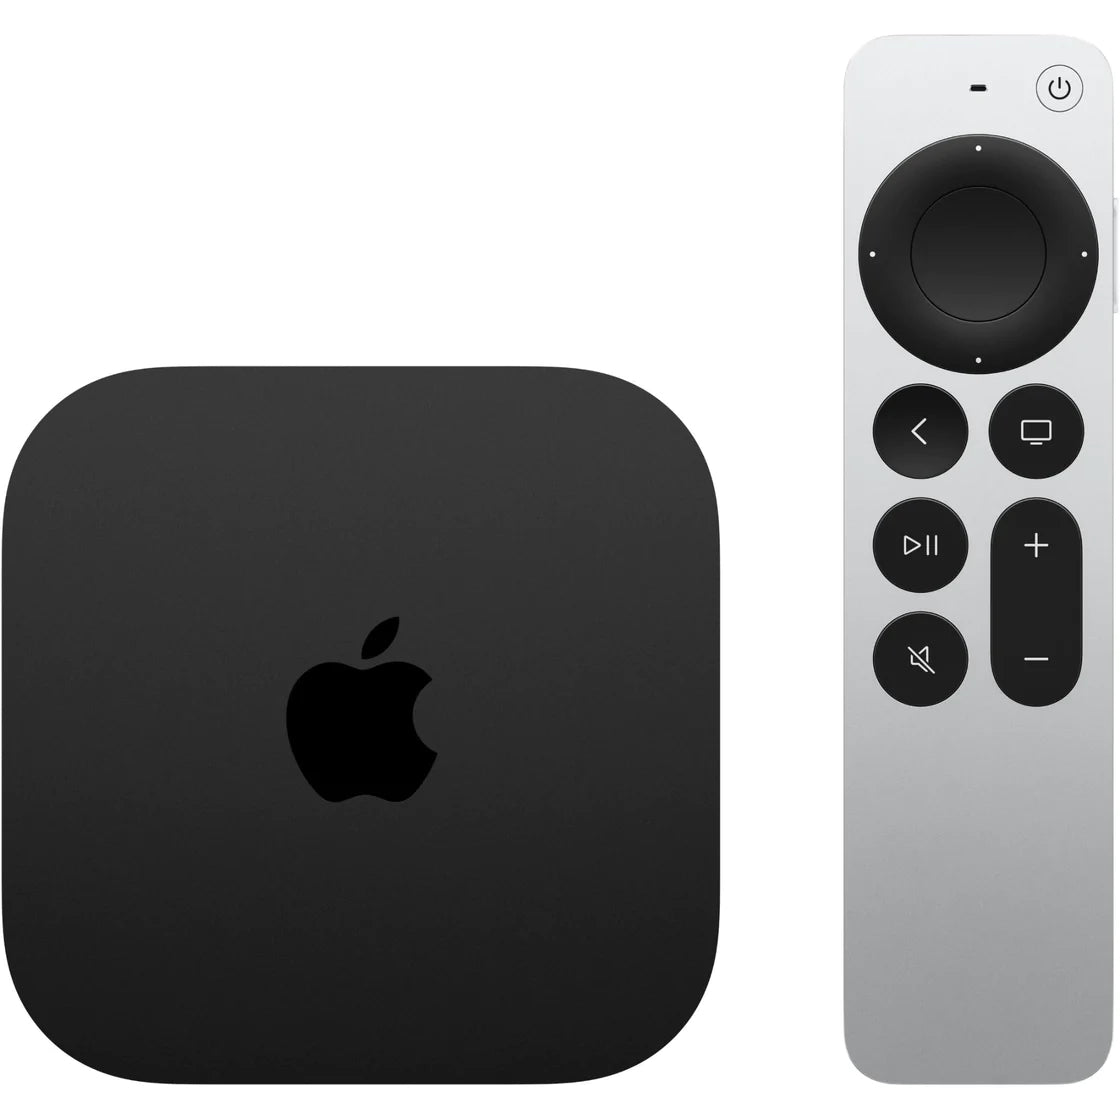 APPLE TVS and remotes